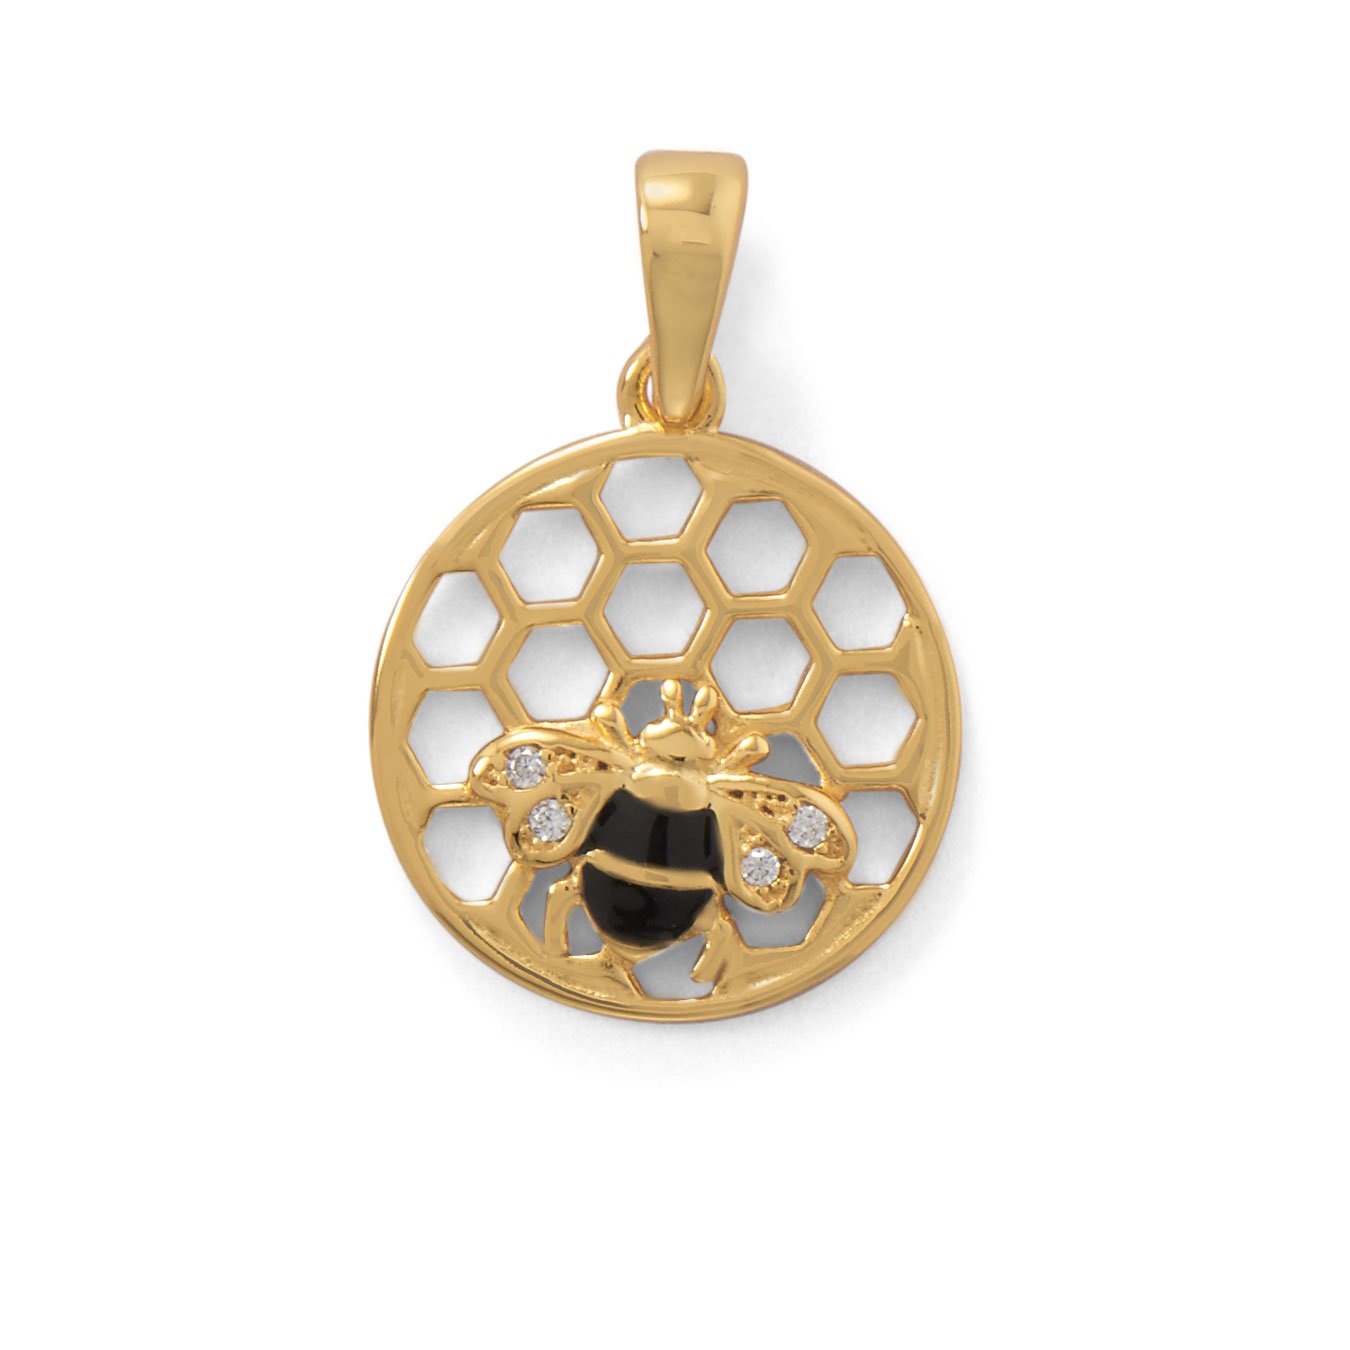 14 Karat Gold Plated Honeycomb with Bee Pendant